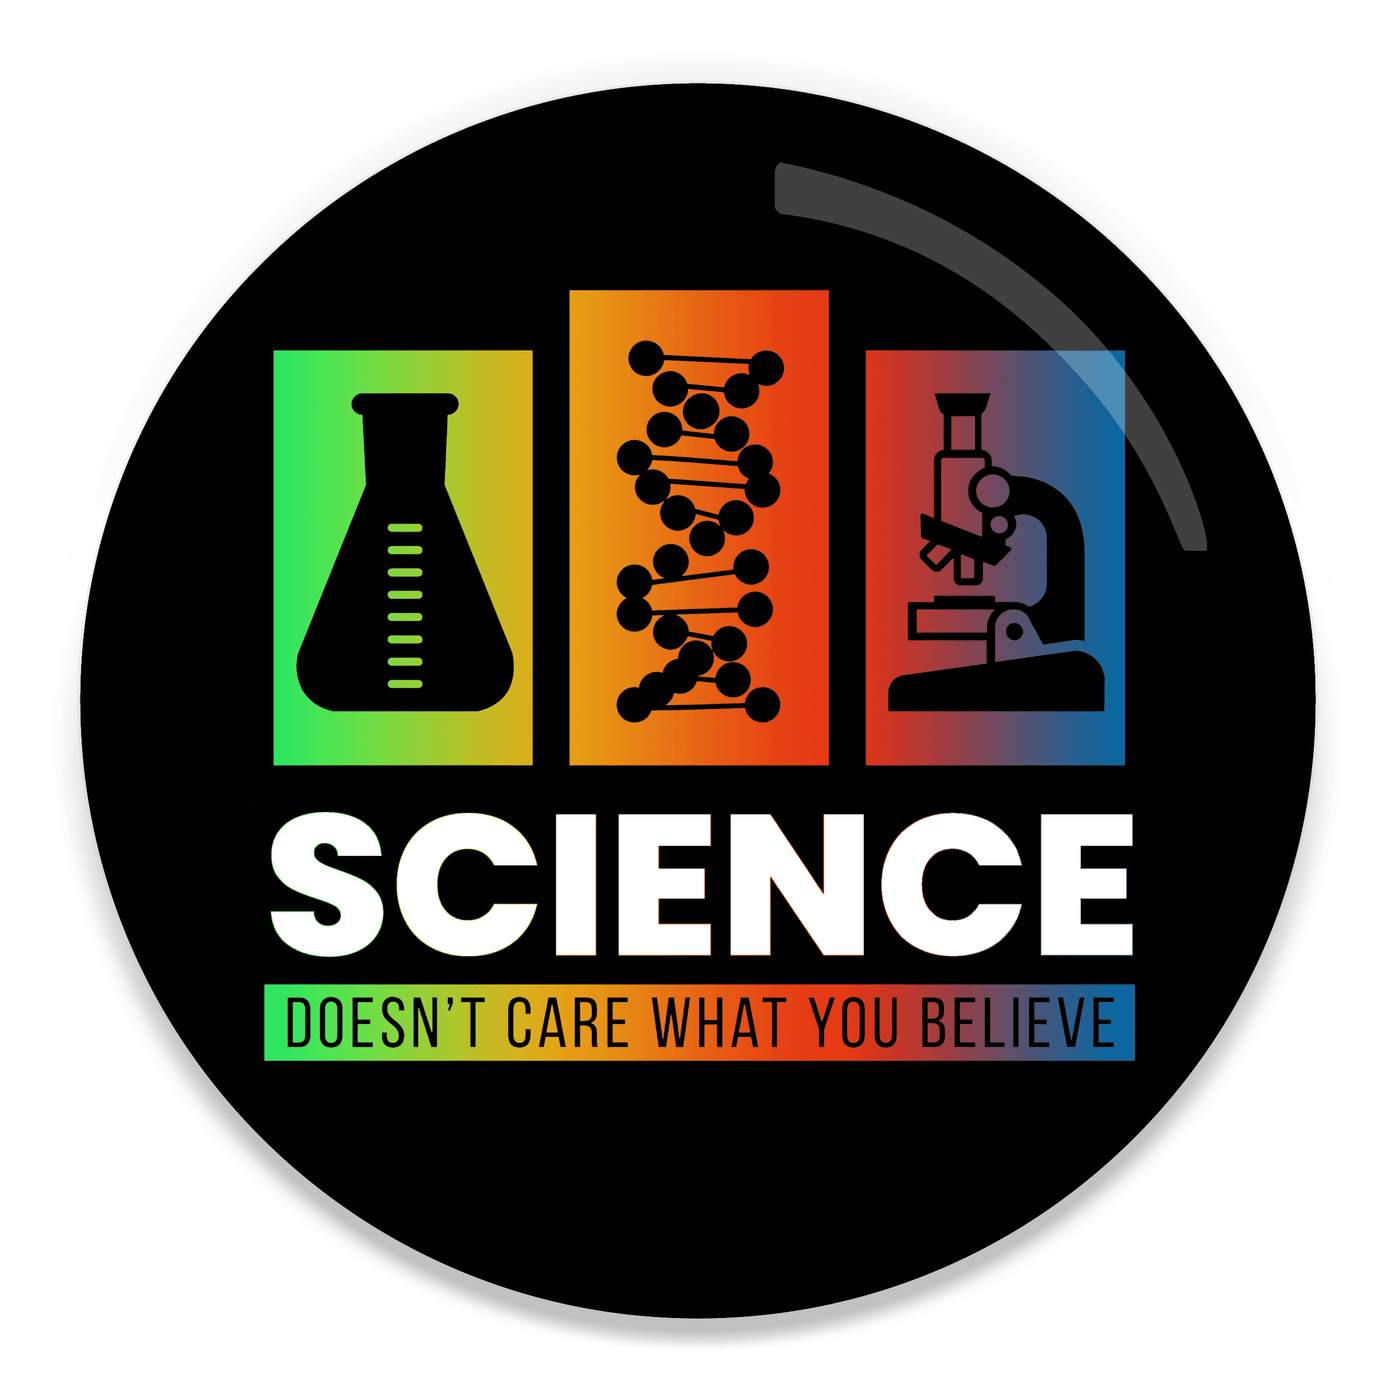 2.25 inch round colorful magnet with image of text that says science doesn't care what you believe